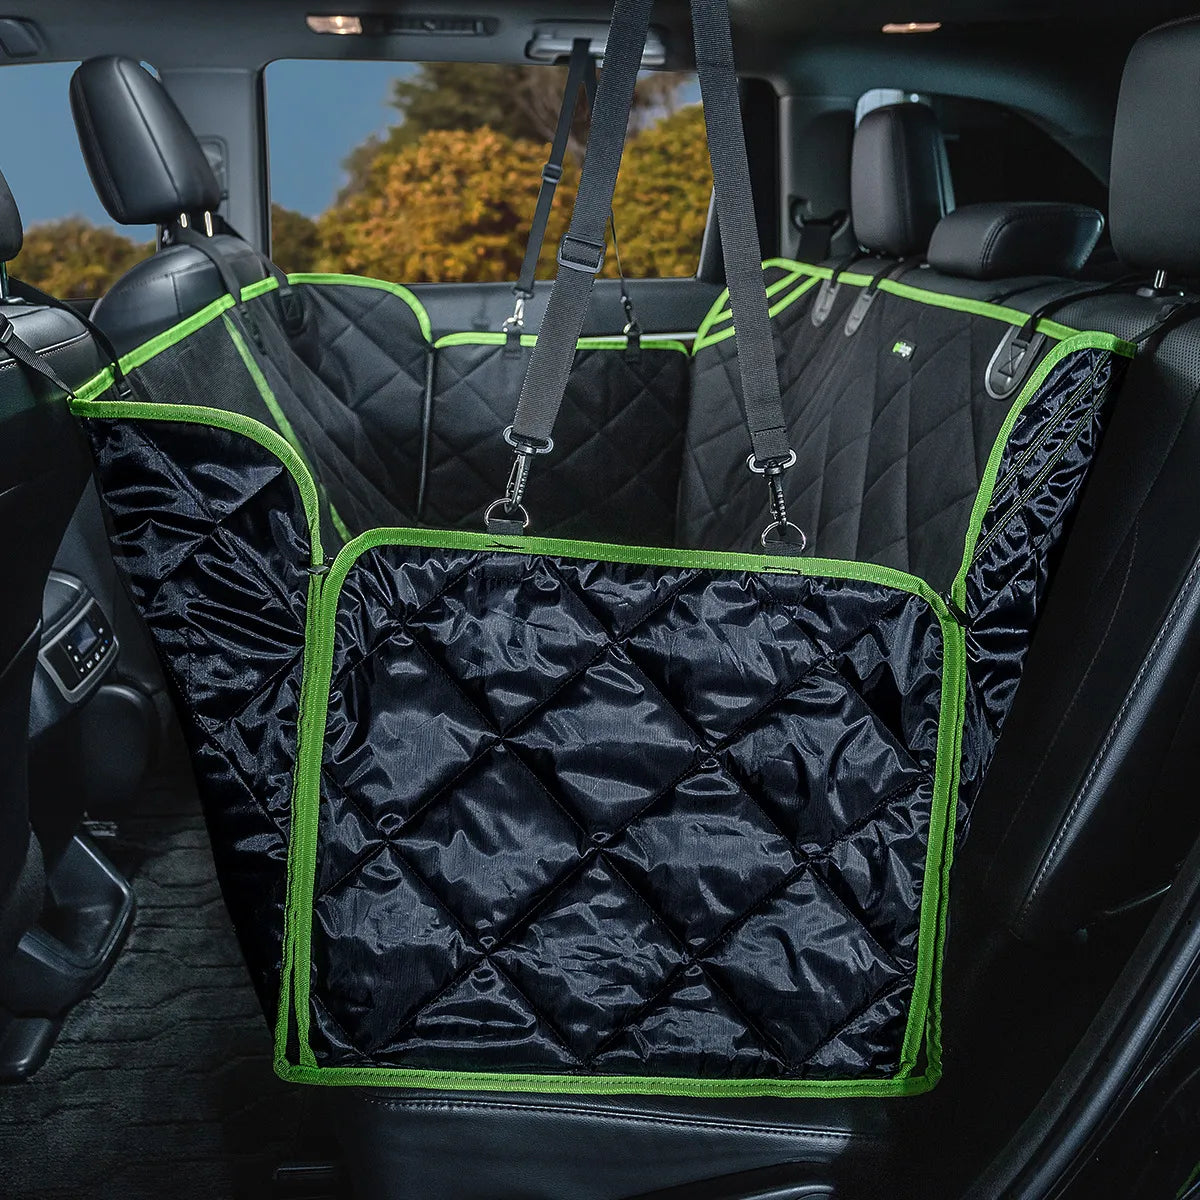 Transport Dog Carrier Car Backseat Protector Mat Dog Car Seat Cover Car Hammock Waterproof Pet For Small Large Dogs Size 137x147